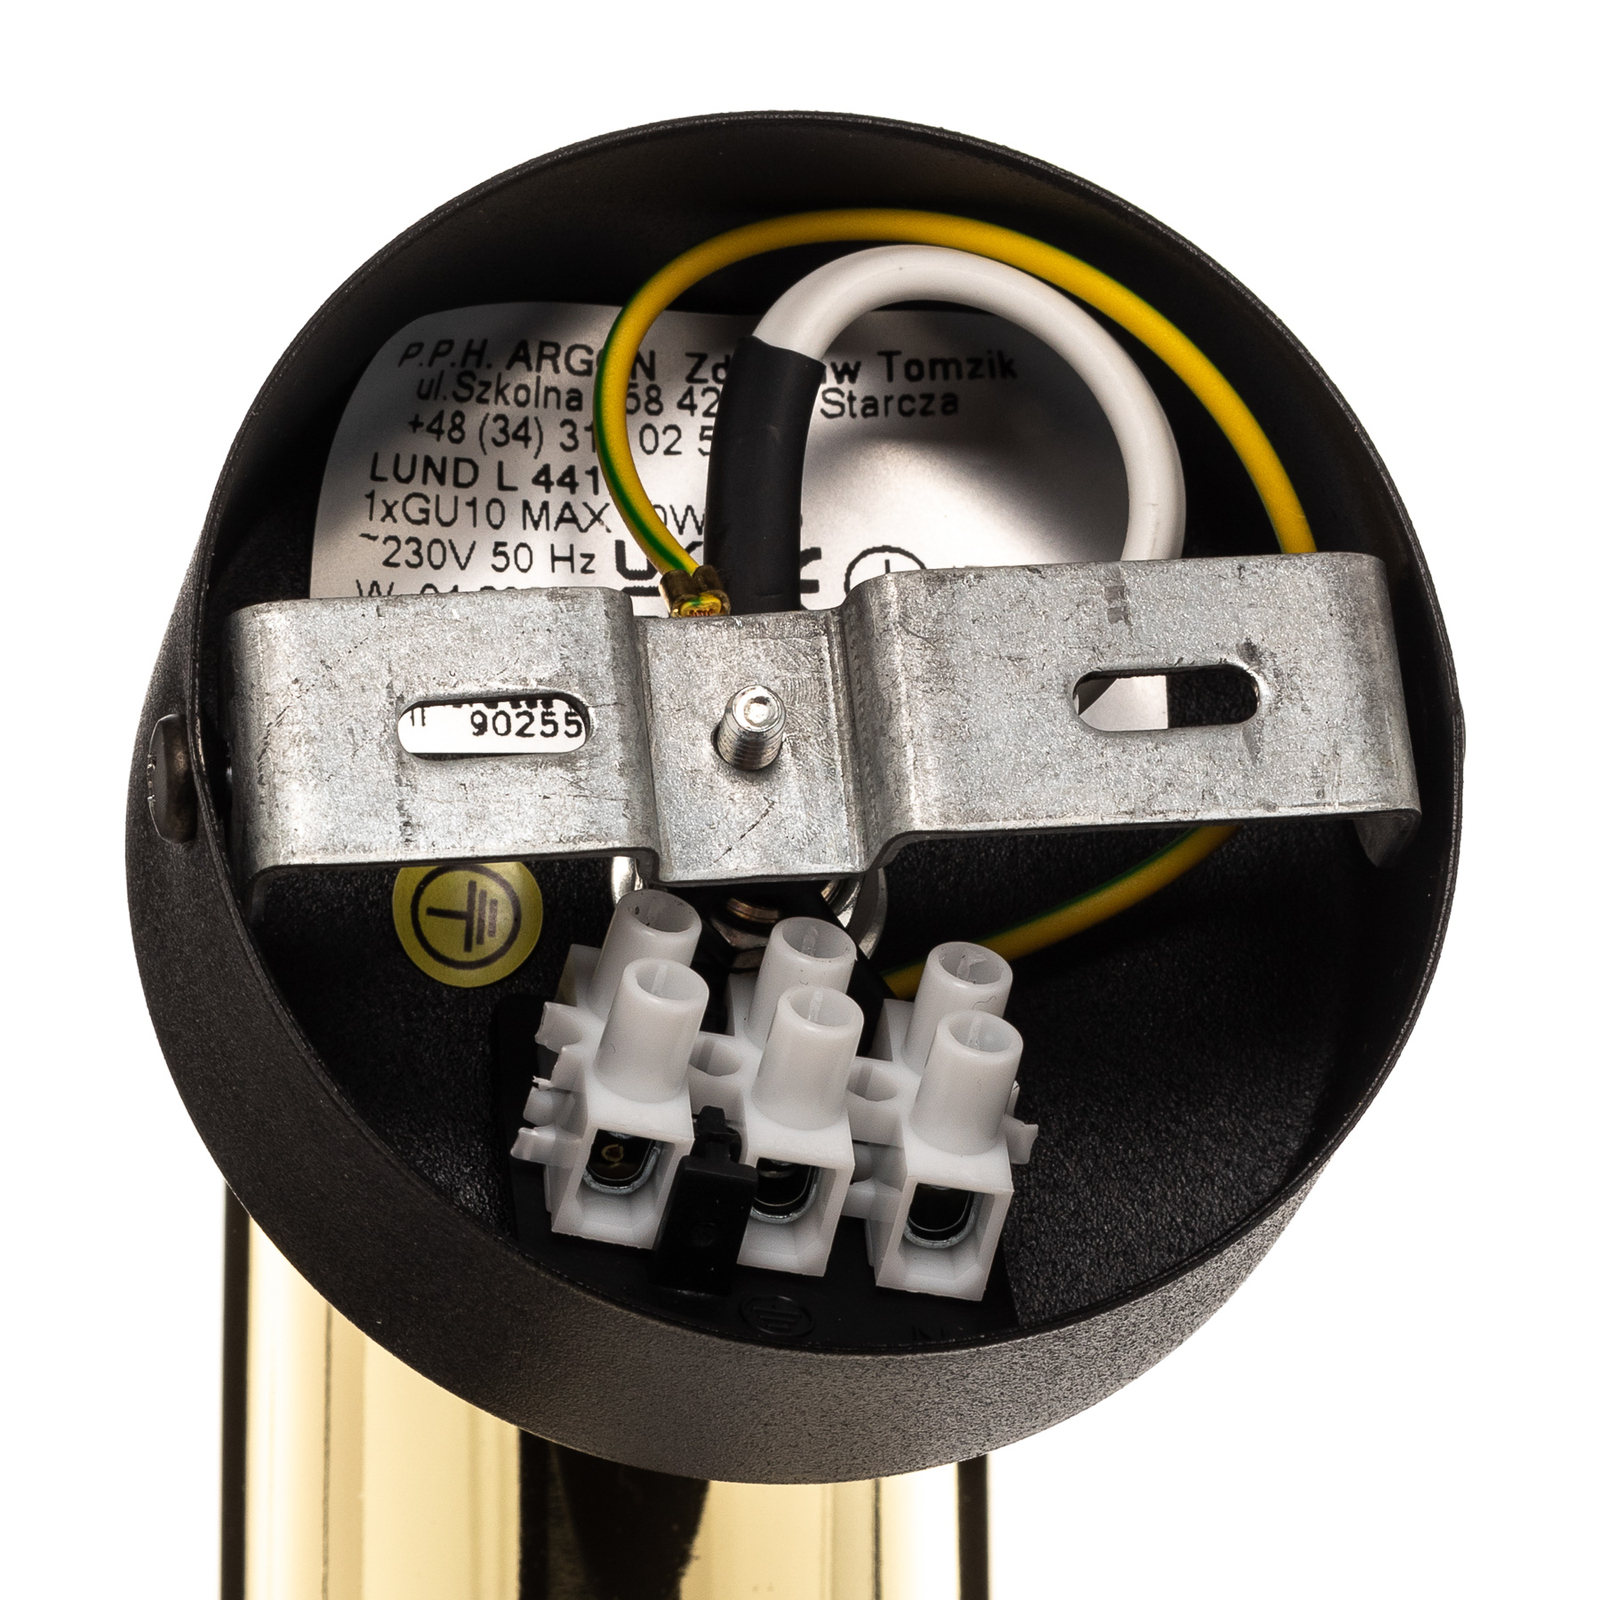 Lund downlight, black and gold, one-bulb